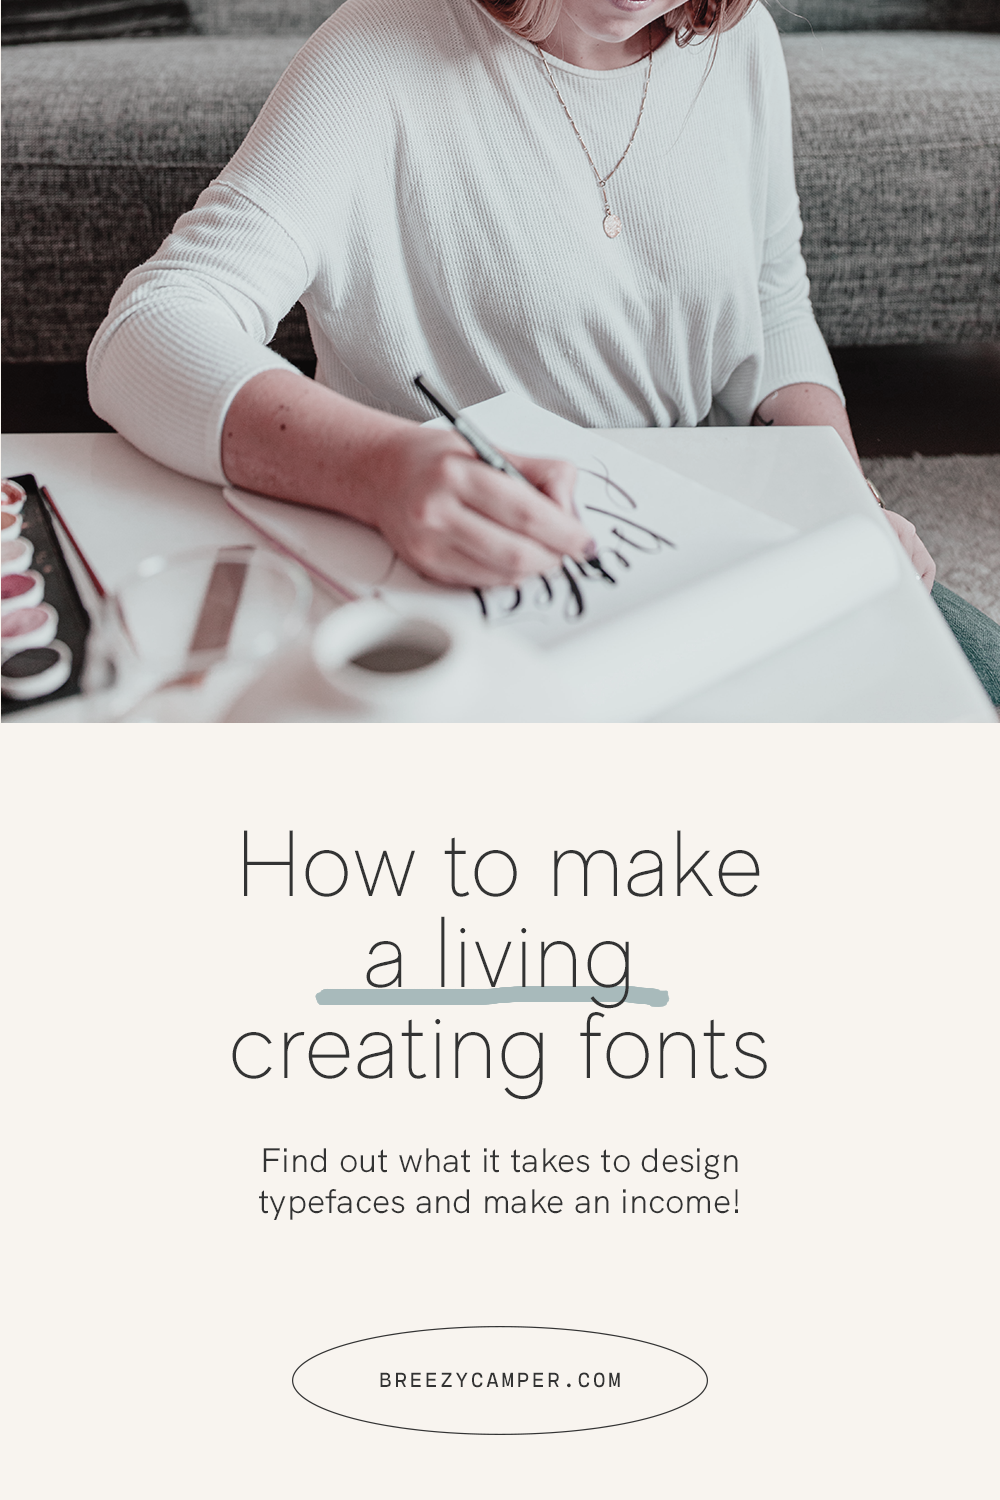 A person sketching with the text "How to make a living creating fonts"